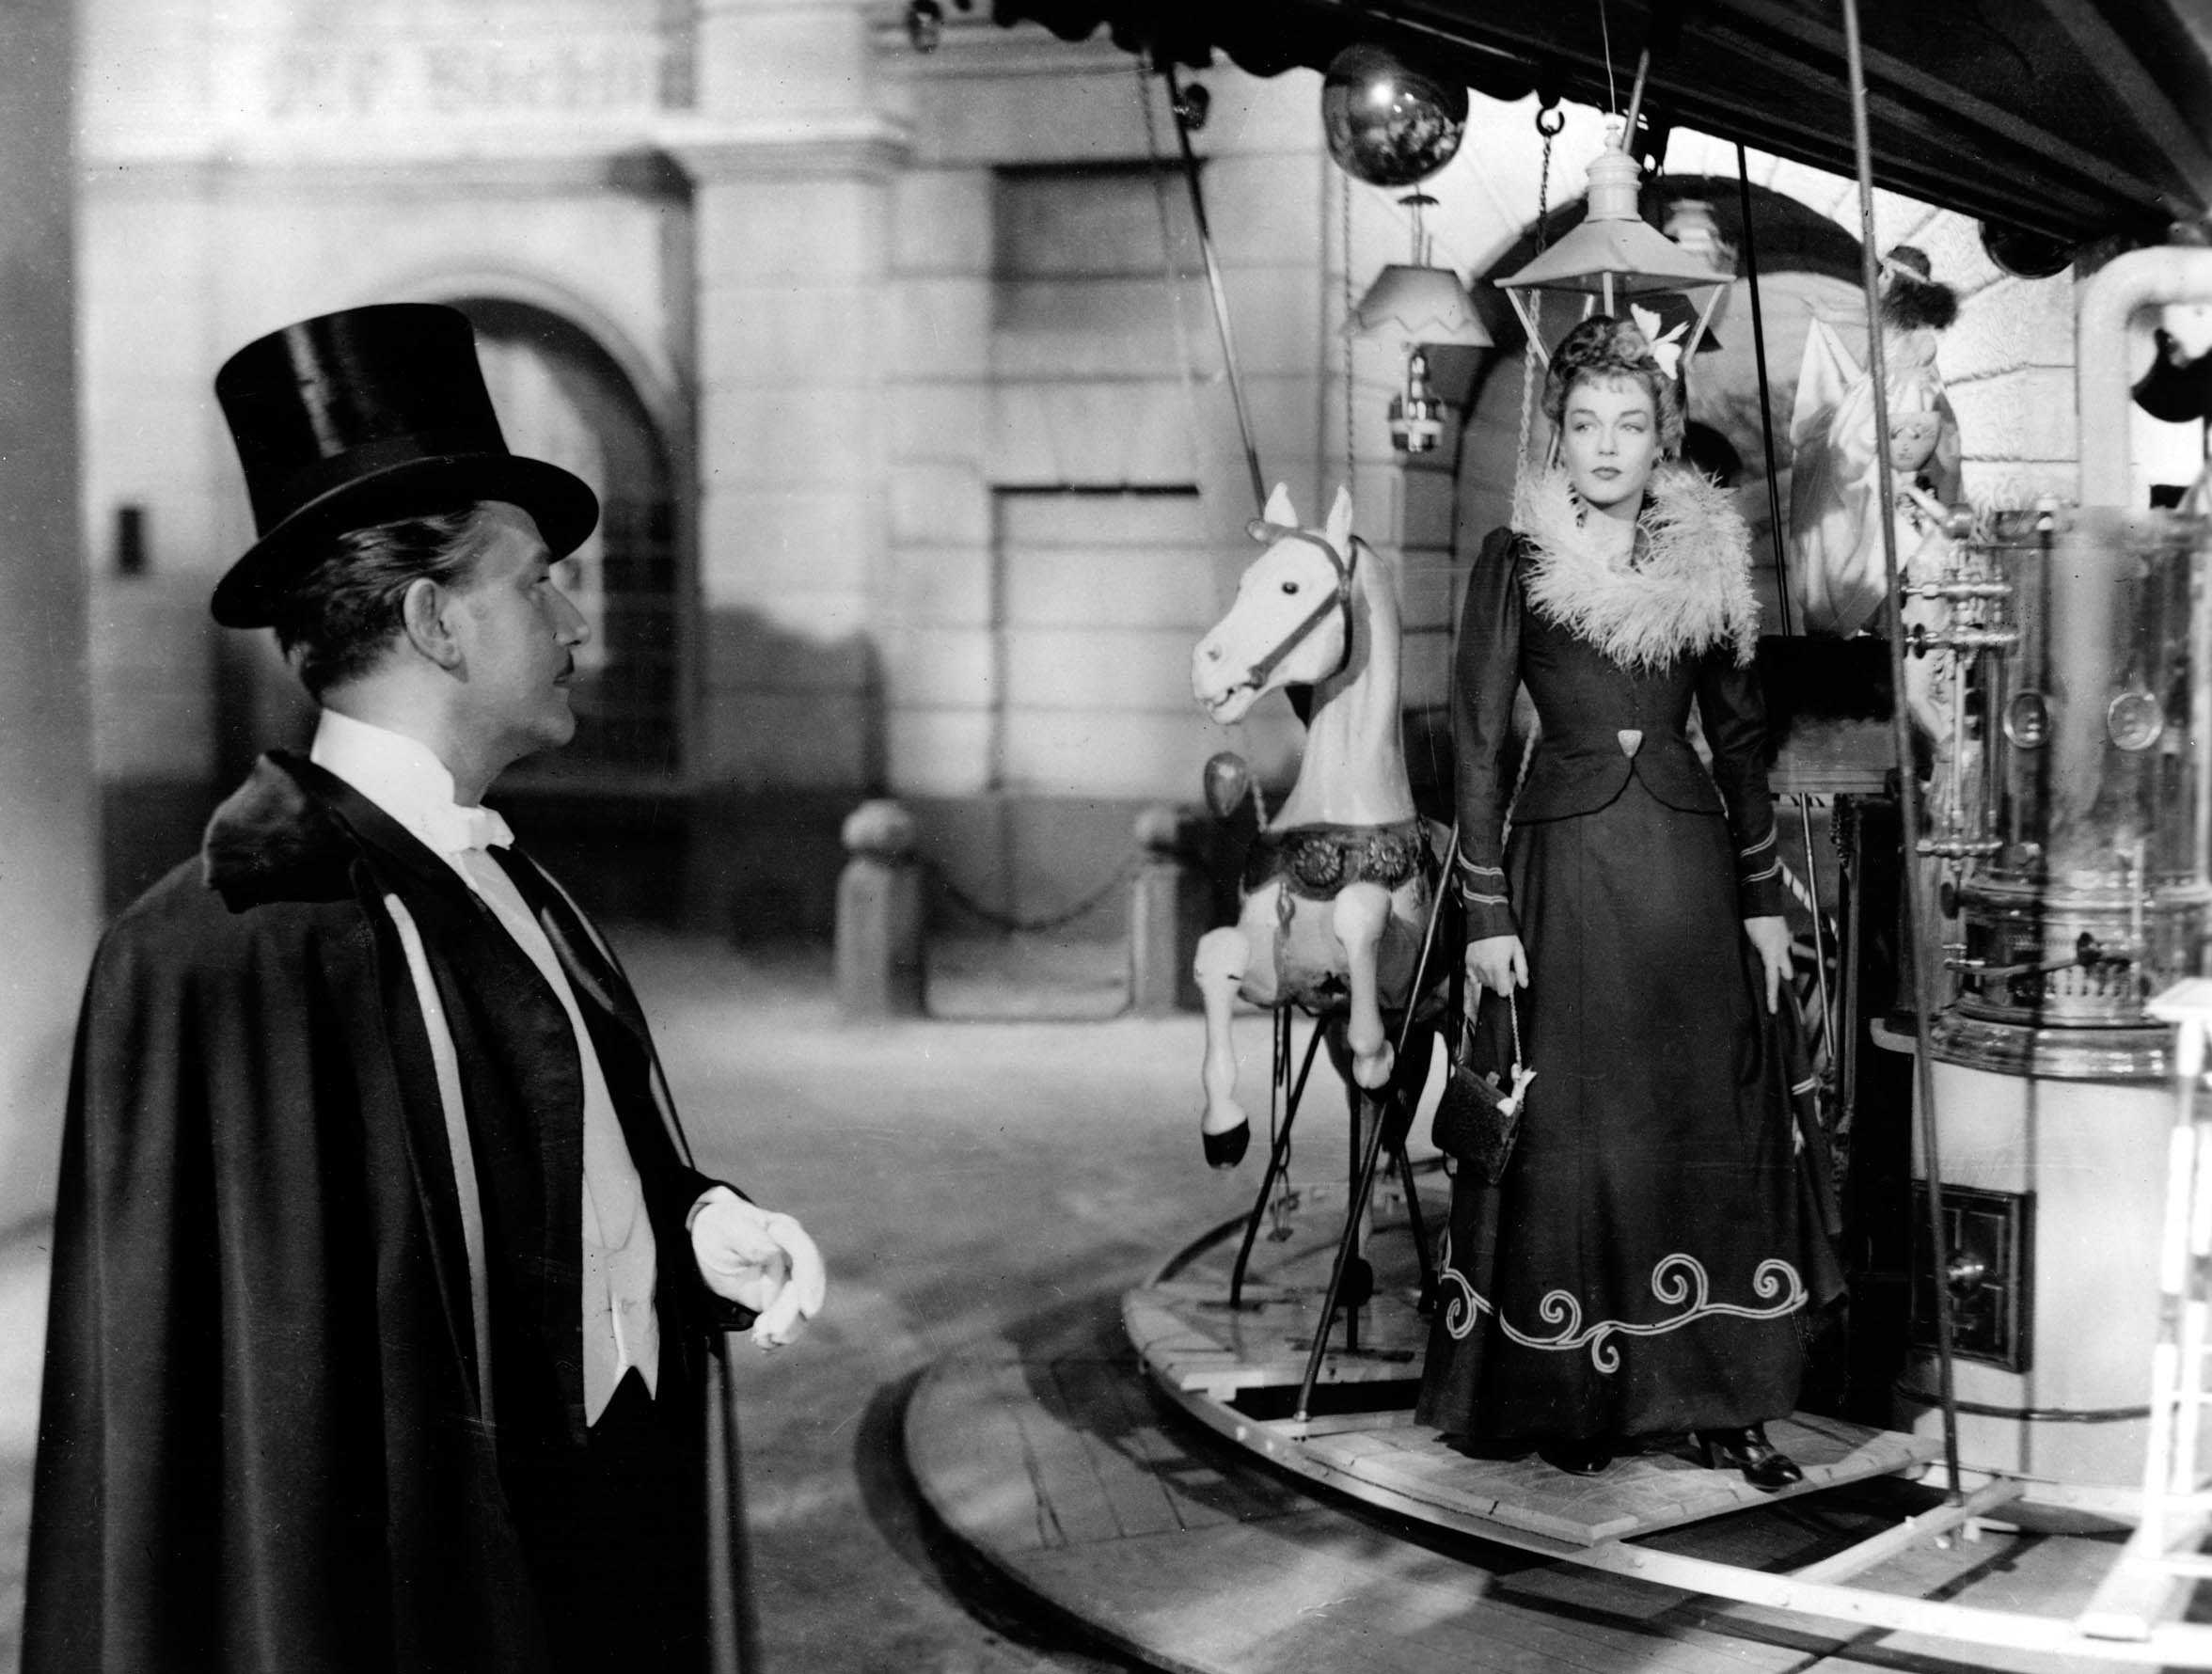 Anton Walbrook looks at Simone Signoret, on a merry-go-round, in La Ronde